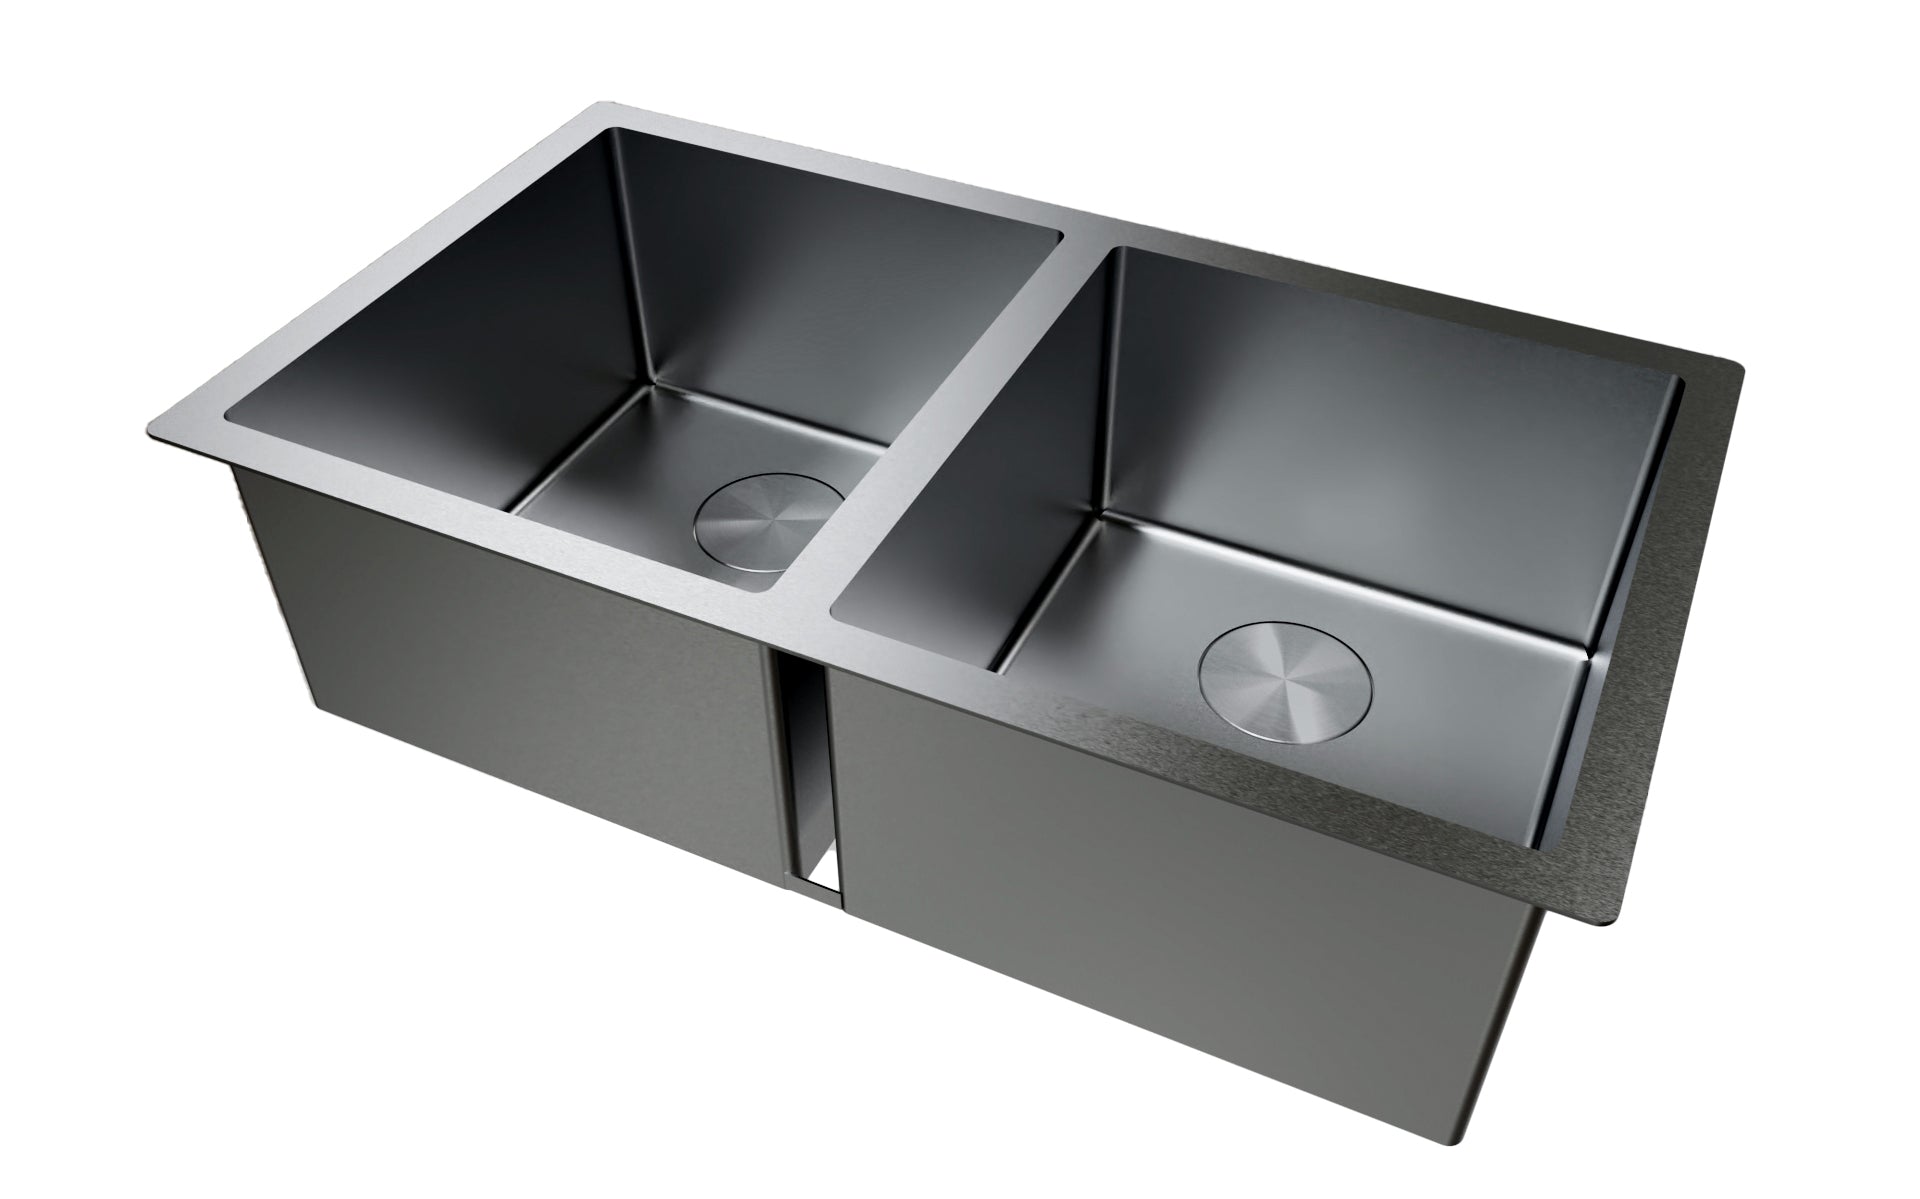 DAX Handmade Nanometre Double Bowl Undermount Kitchen Sink - Black Stainless Steel 304 - Accessories Included (DAX-NB3218-R10)